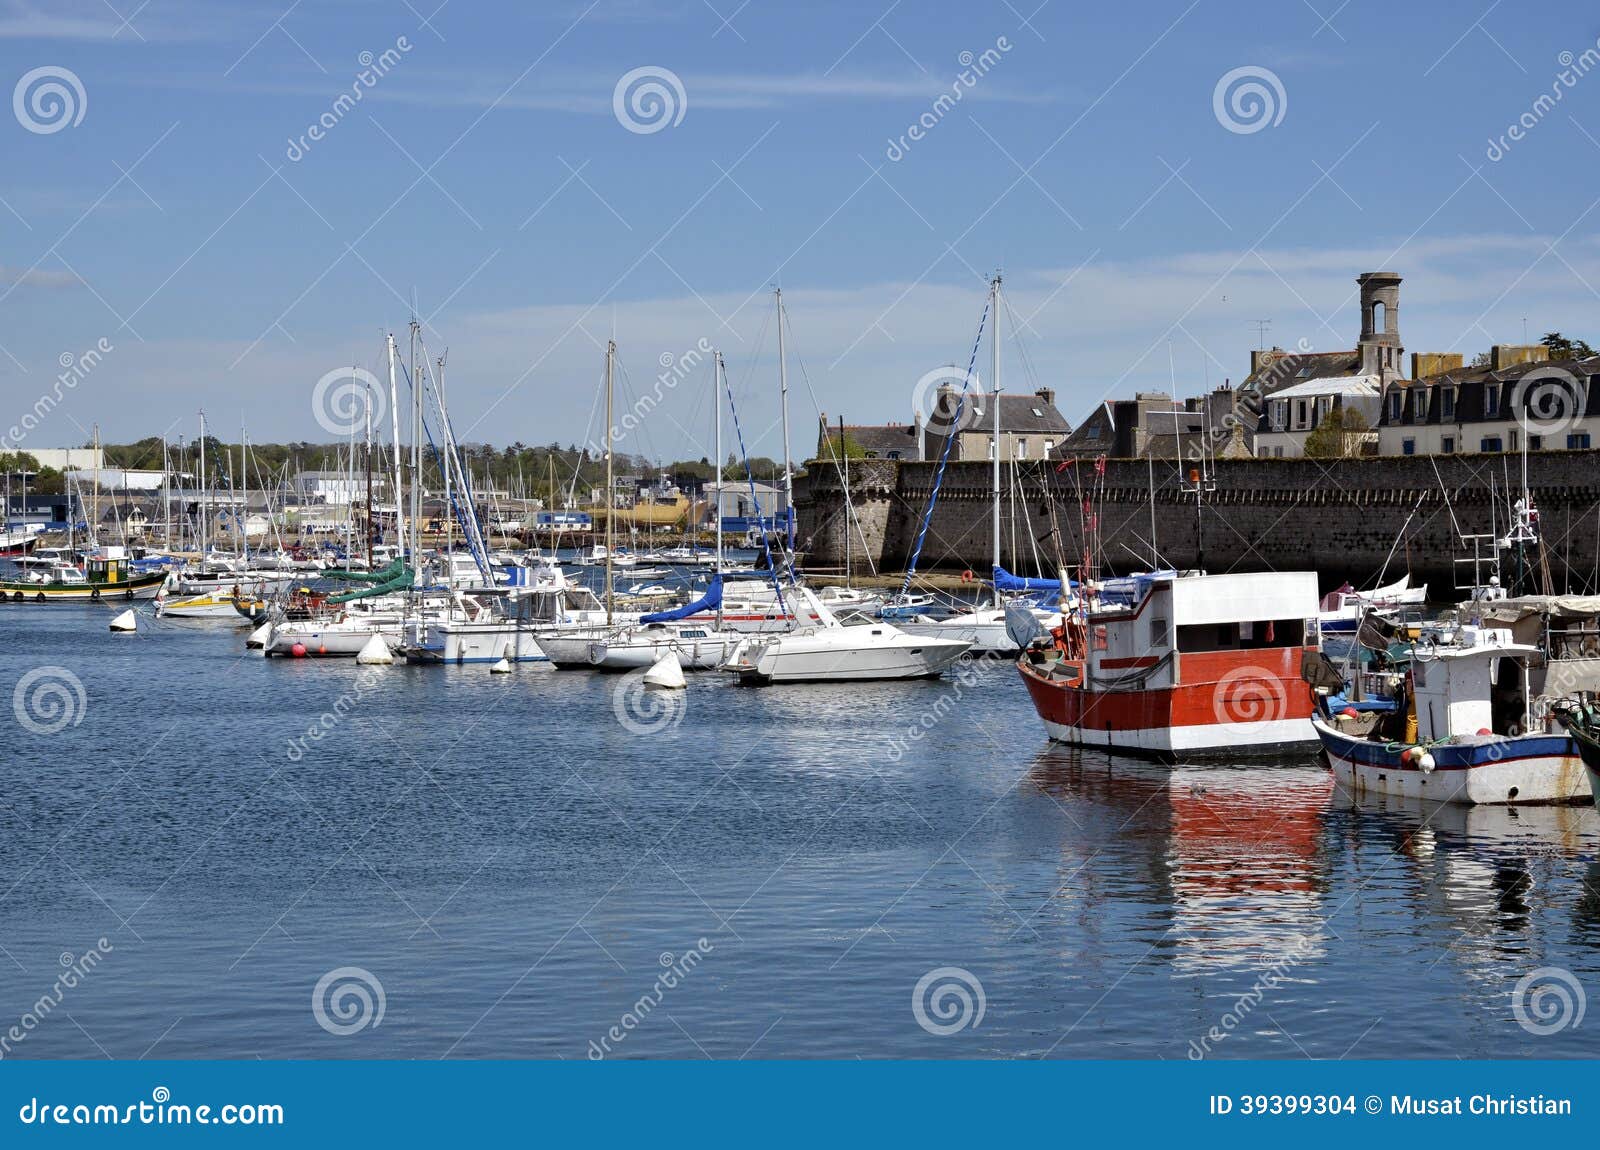 fishing port of concarneau in france